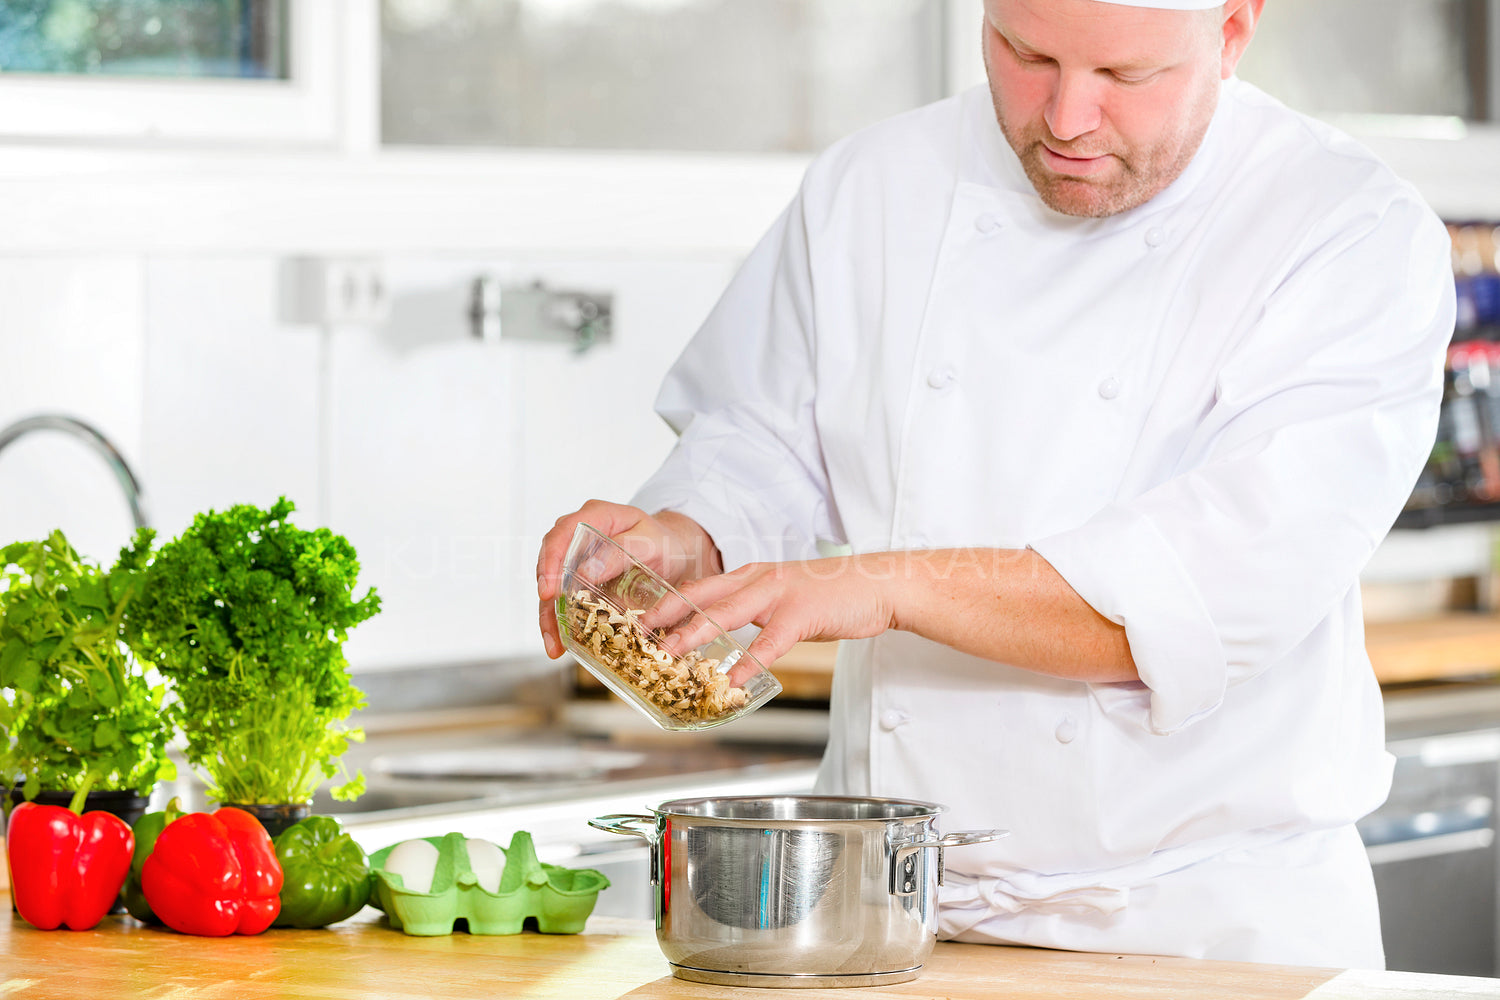 Professional chef preparing food in large kitchen